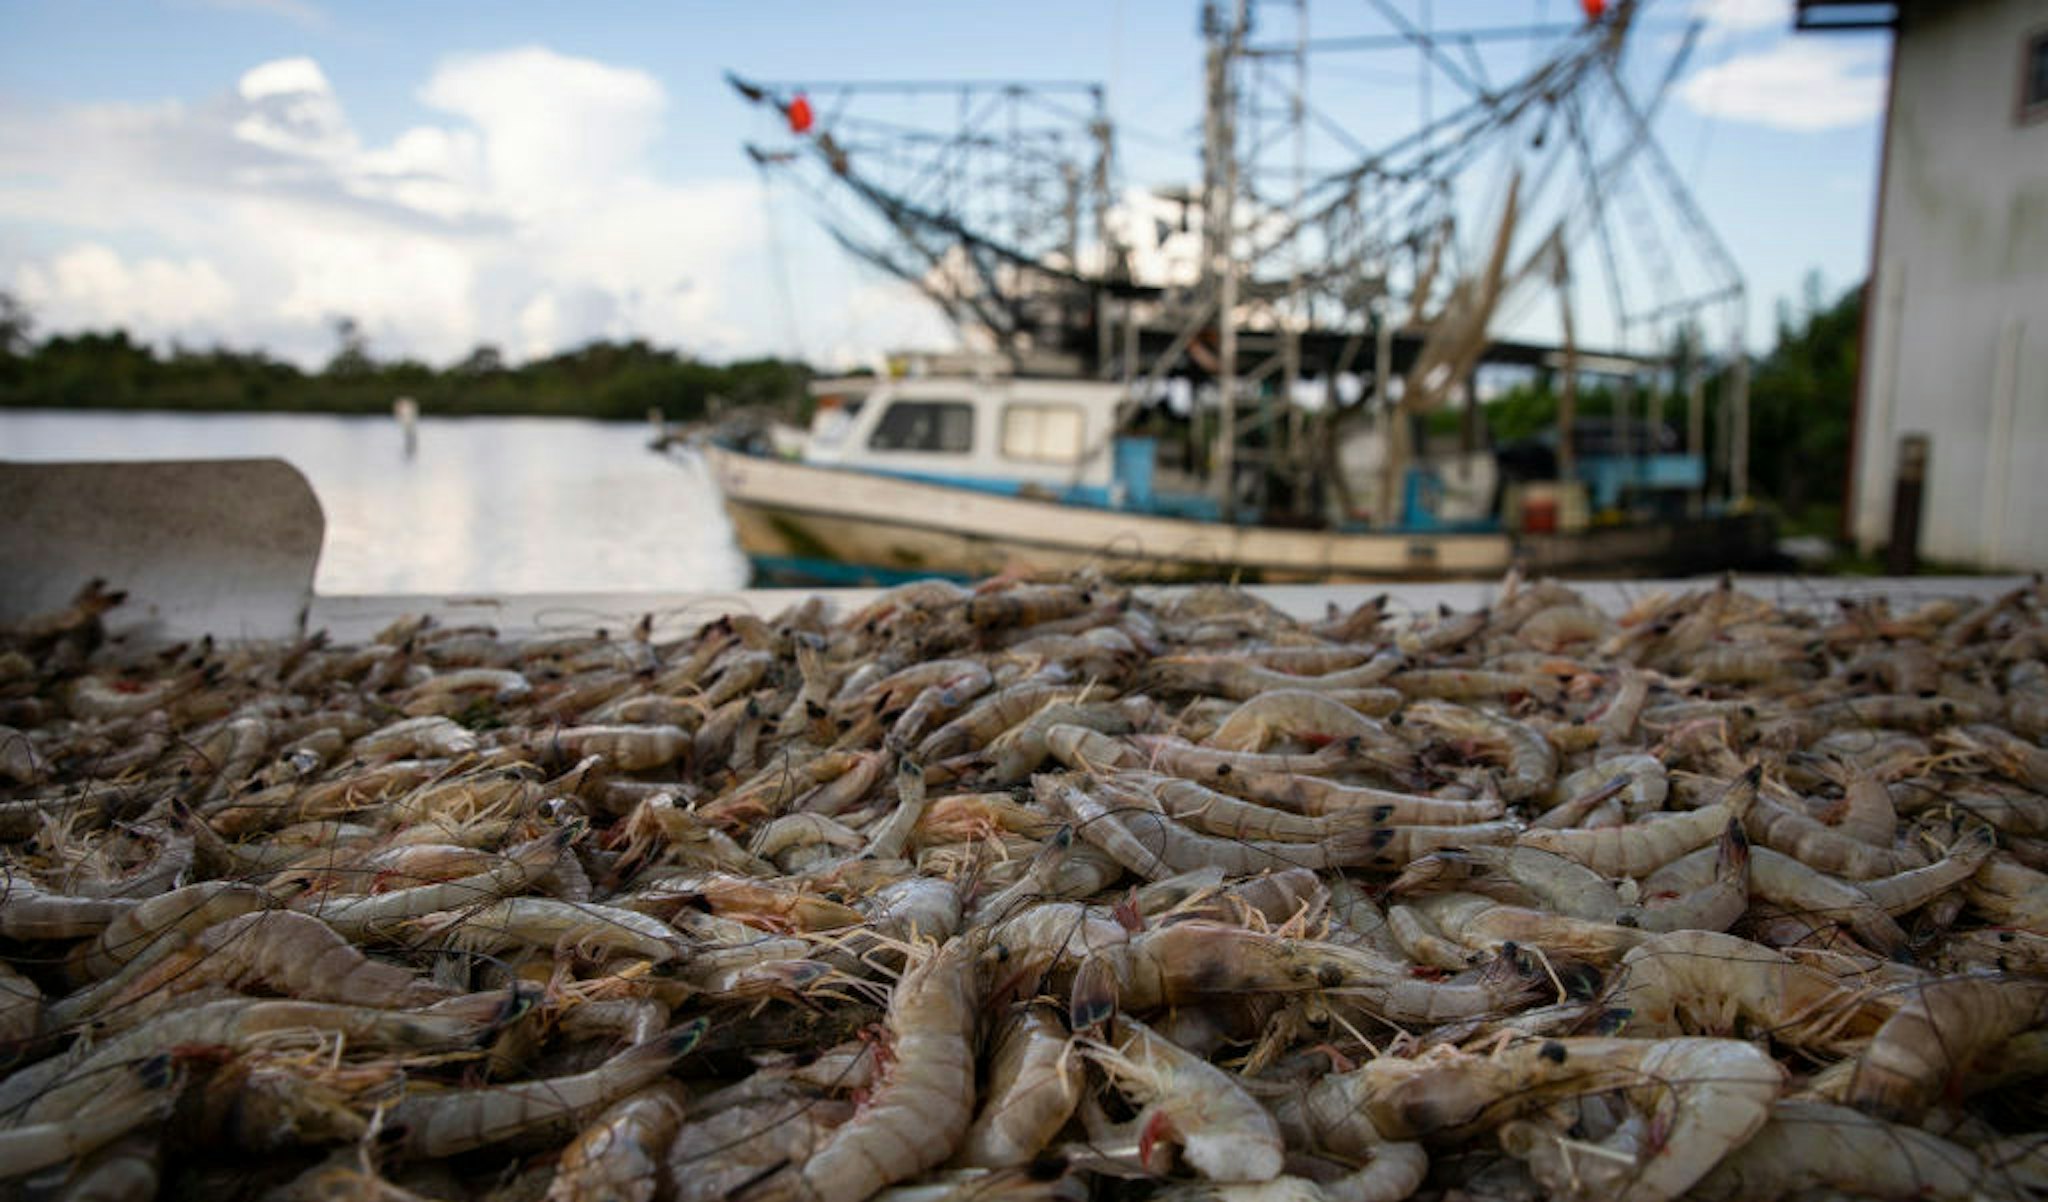 Nearly 600 pounds of shrimp from Acy Cooper's shrimp trawler are cleaned and weighed at a seafood dealer following a 12 hour plus overnight shift of shrimping on August 27, 2019 off the coast of Plaquemines Parish, Louisiana. (Photo by Drew Angerer/Getty Images)